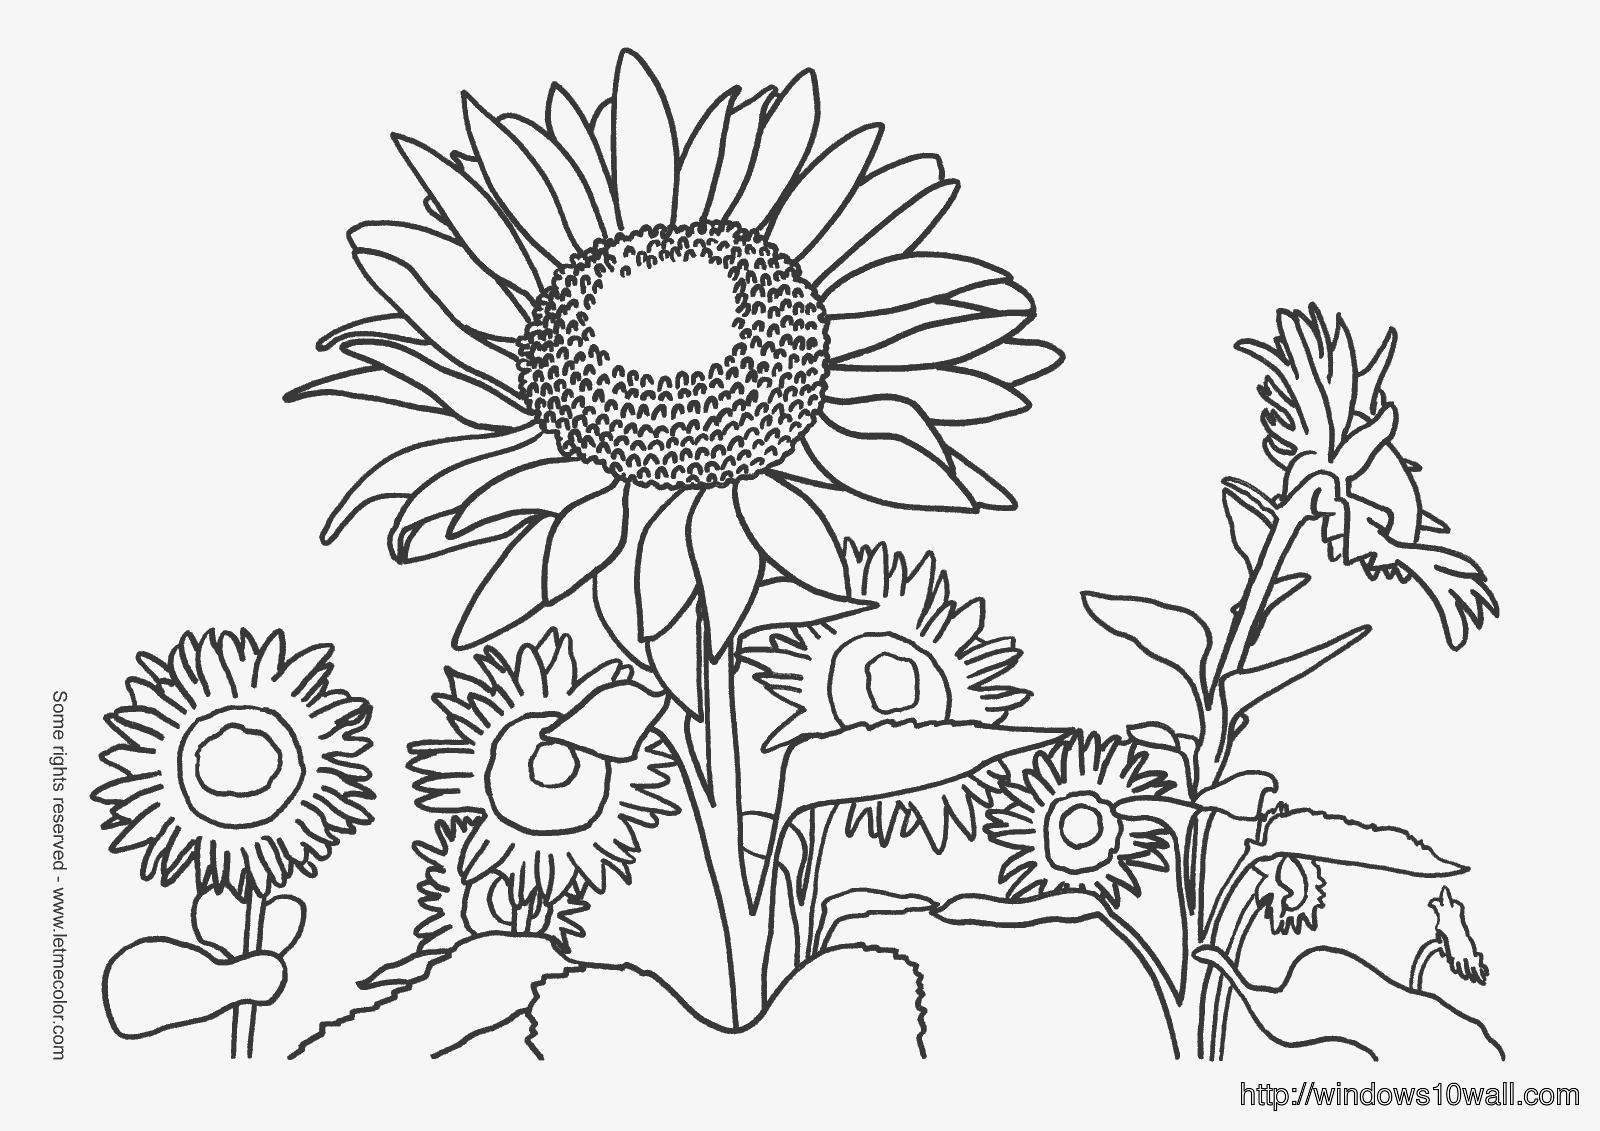 Sunflowers Coloring Page for Kids Wallpaper